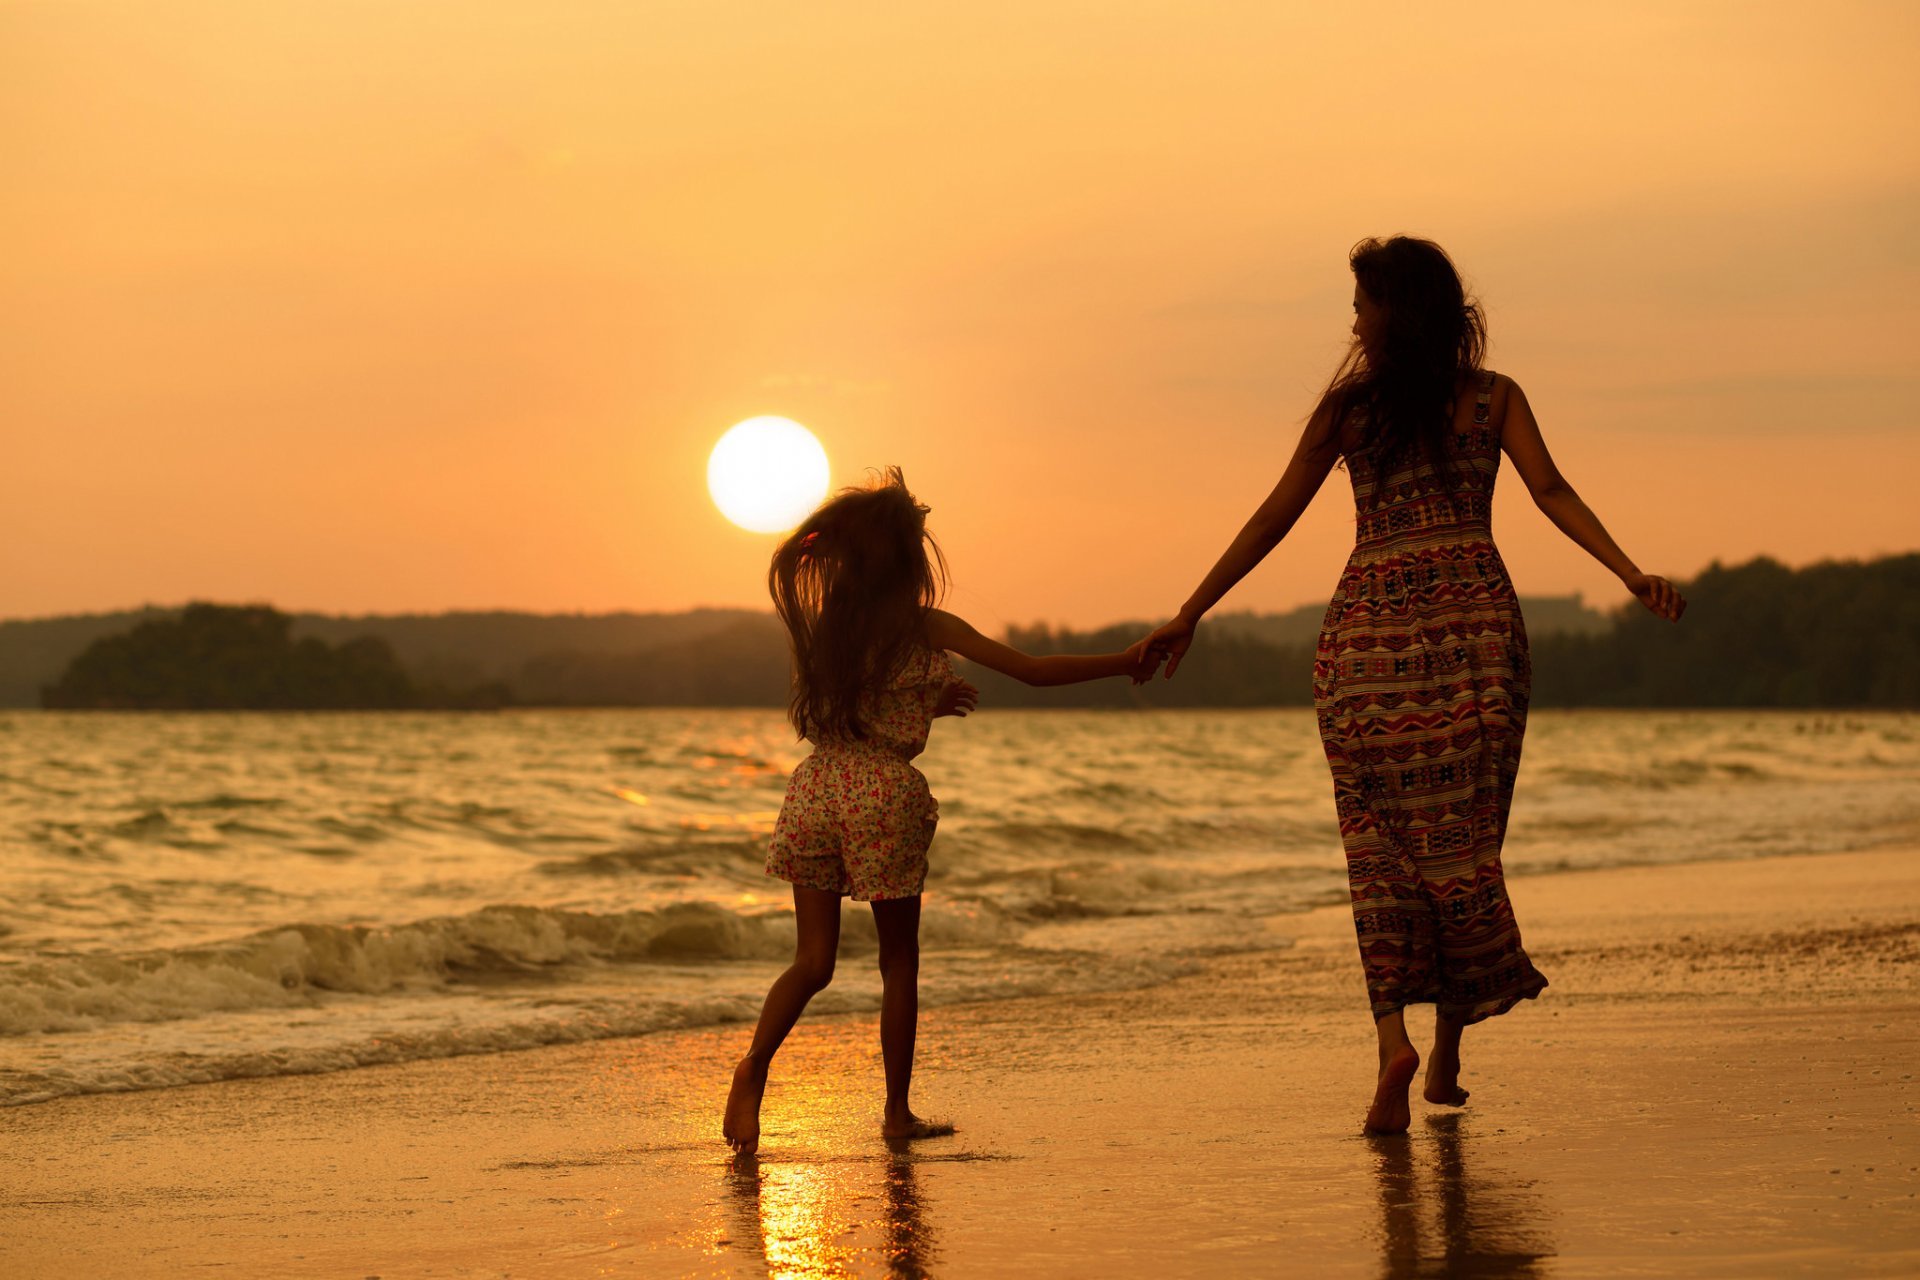 Mother And Daughter Images Hd - 1920x1280 Wallpaper 